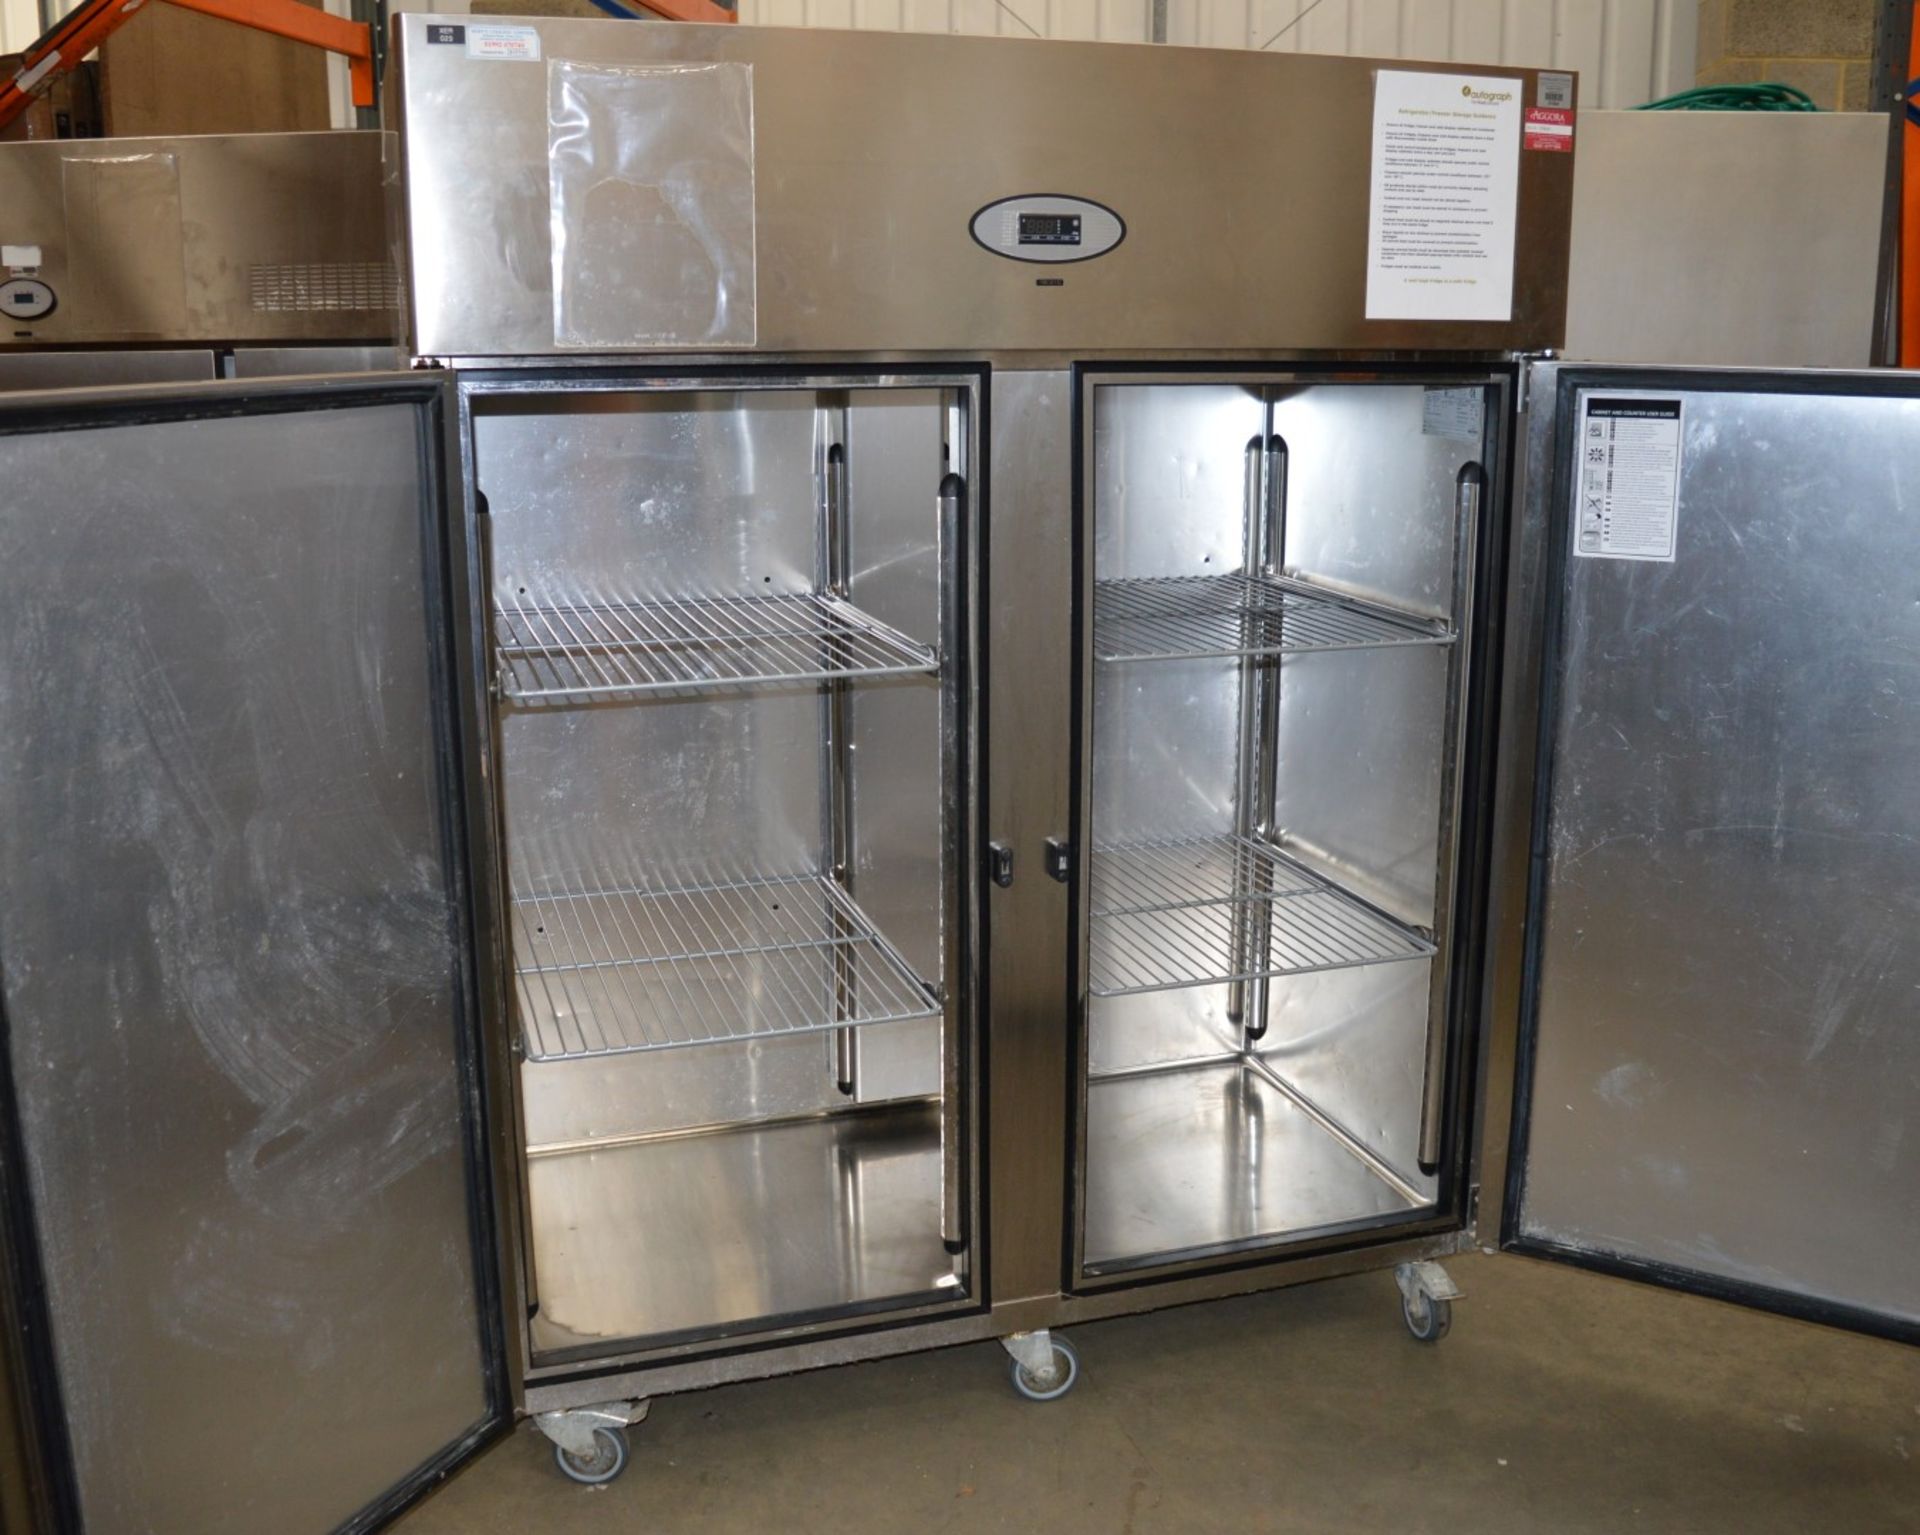 1 x Foster ProG1100L-A Gastro Pro 1100 Litre Stainless Steal Commercial Freezer - Aluminium Interior - Image 4 of 8